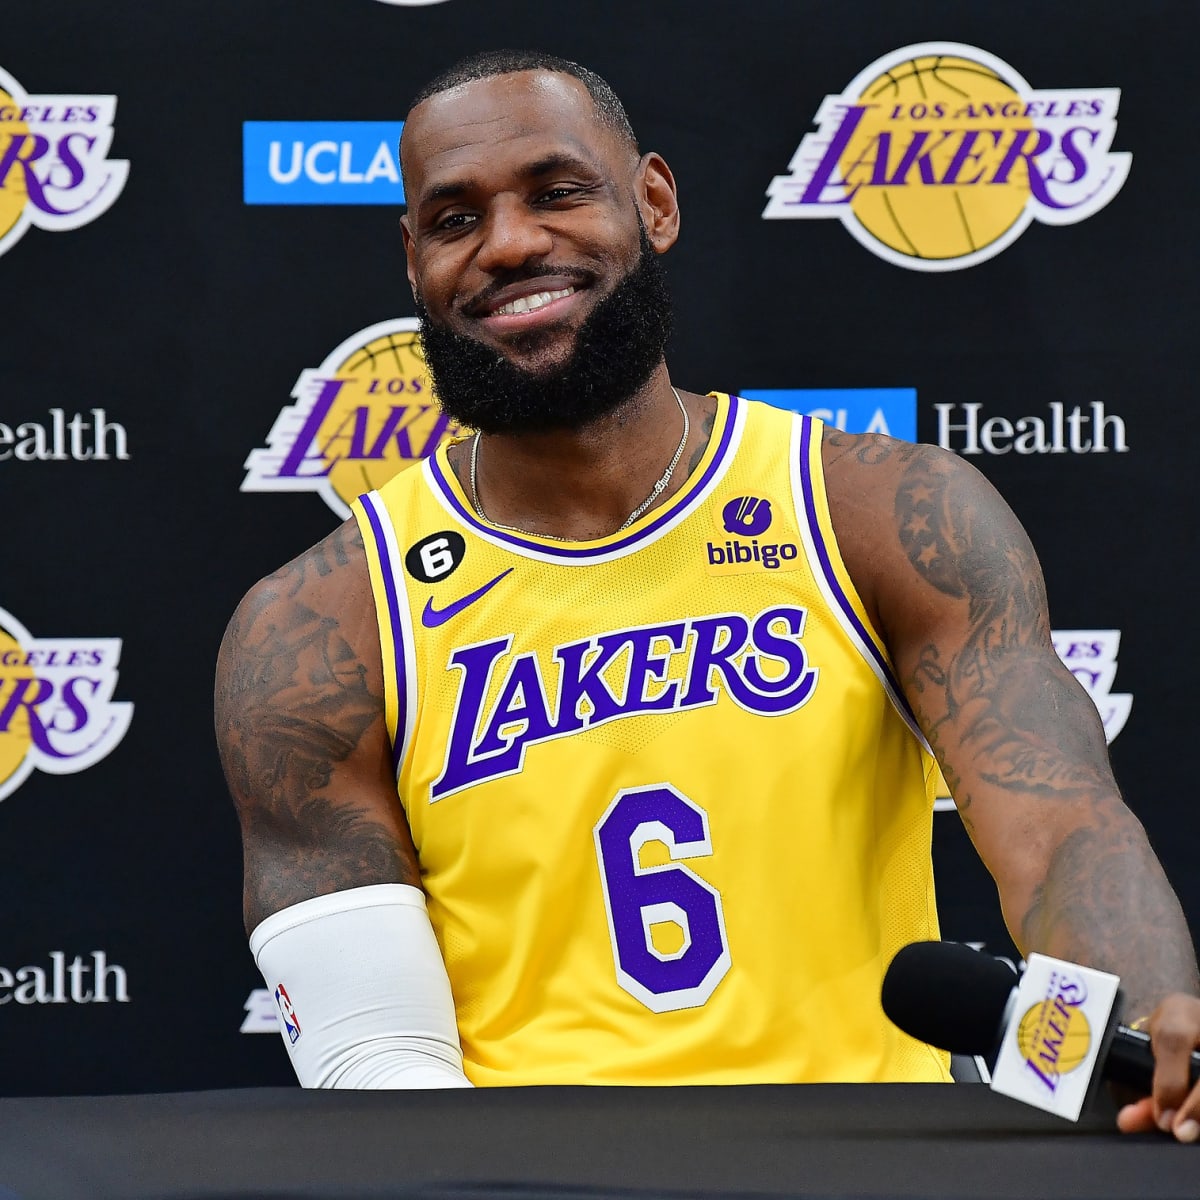 Lakers News: LeBron James Part Of Expanded Mitchell & Ness